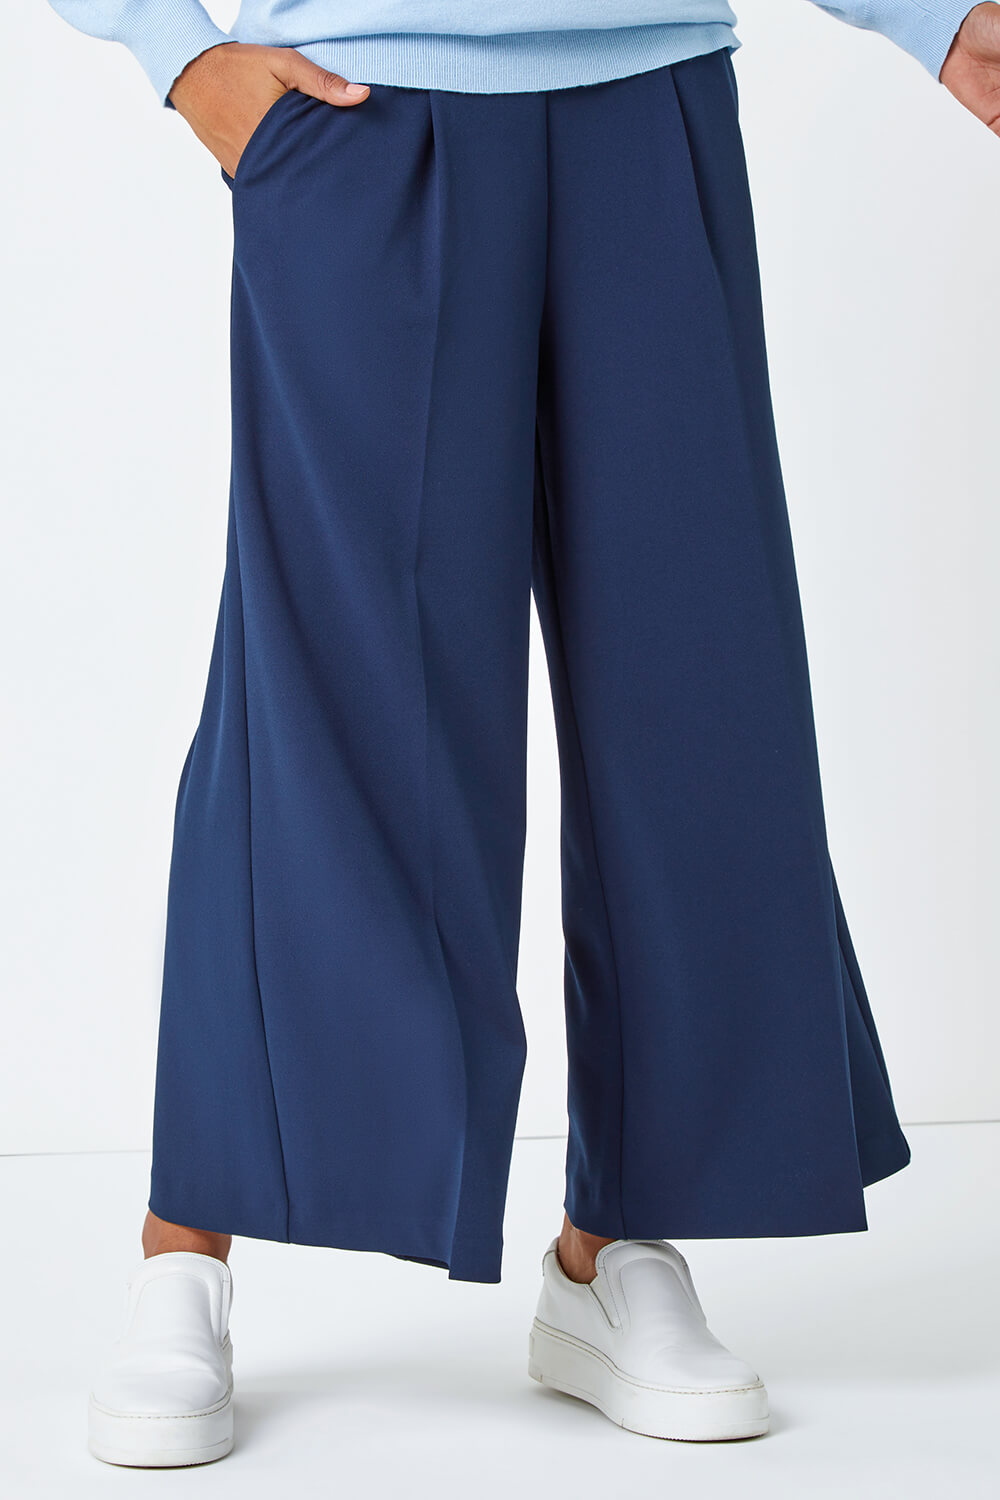 Navy  Wide Leg Stretch Culottes, Image 4 of 5